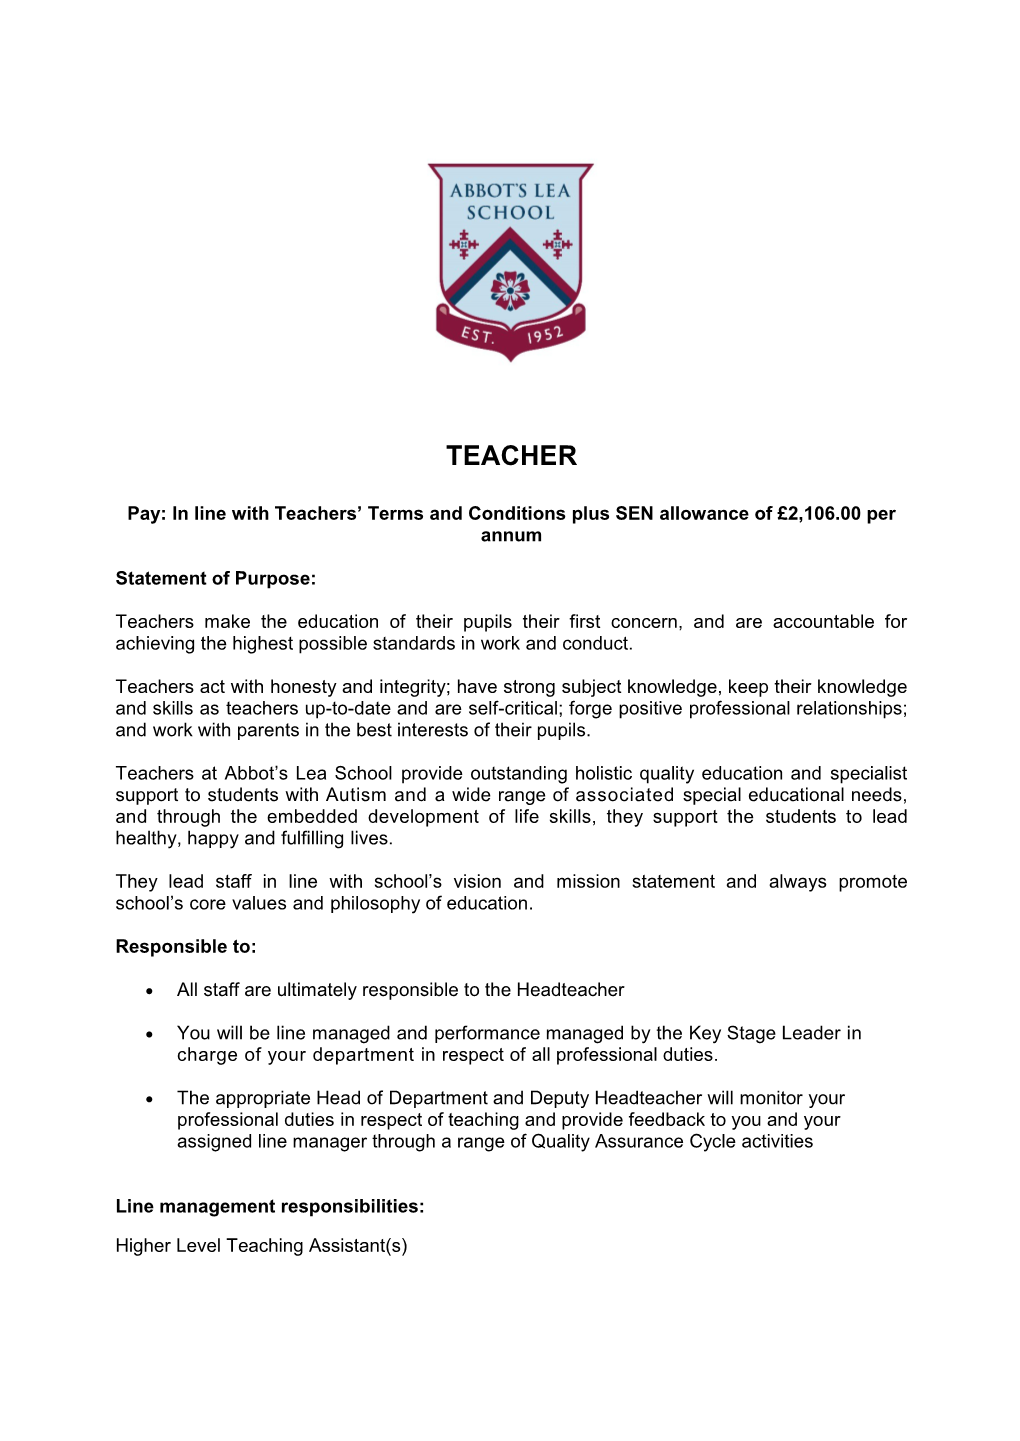 Pay: in Line with Teachers Terms and Conditions Plus SEN Allowance of 2,106.00 Per Annum